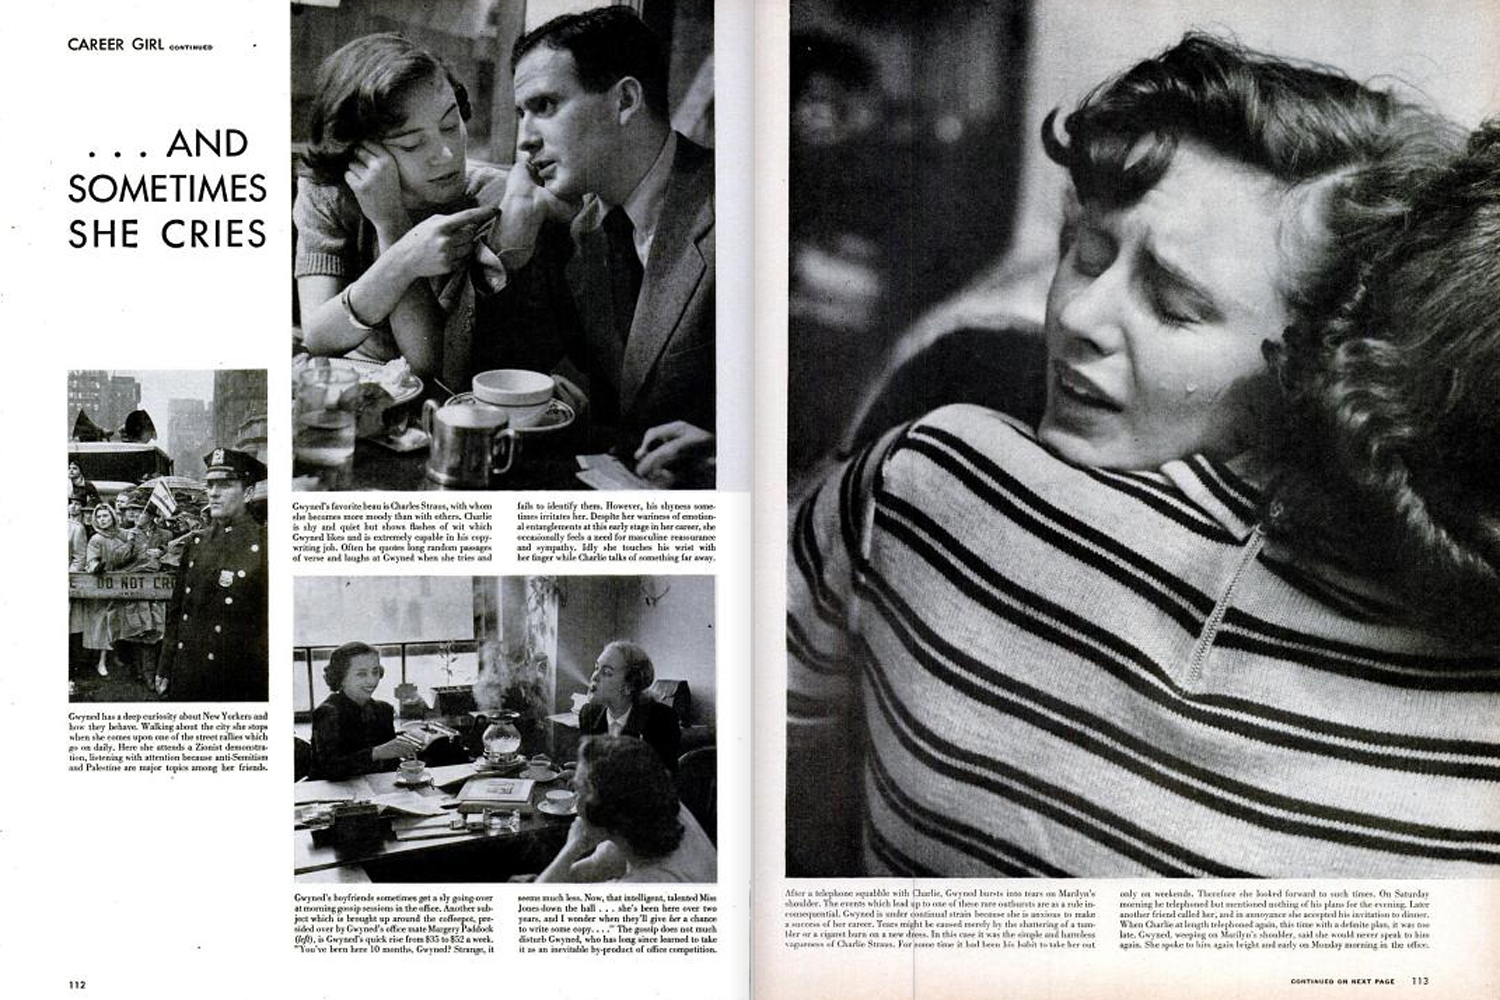 LIFE magazine, May 3, 1948. NOTE: Best viewed in "Full Screen" mode; see button at right.